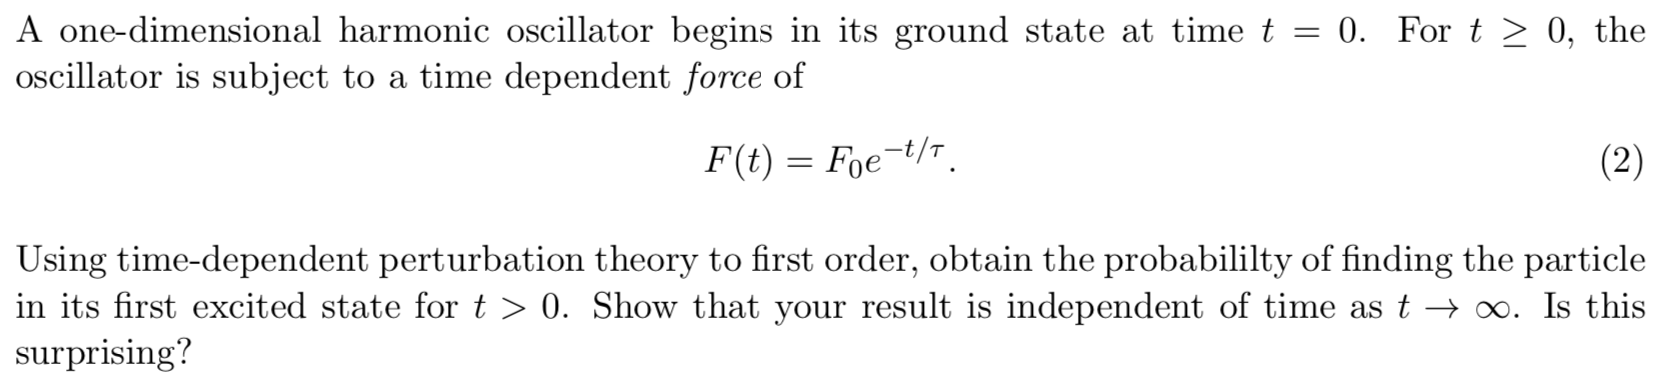 A one-dimensional harmonic oscillator begins in its ground state at time t = 0. For t > 0, the
oscillator is subject to a time dependent force of
F(t) Foet/
(2)
Using time-dependent perturbation theory to first order, obtain the probabililty of finding the particle
in its first excited state for t > 0. Show that your result is independent of time as t > o0. Is this
surprising?
